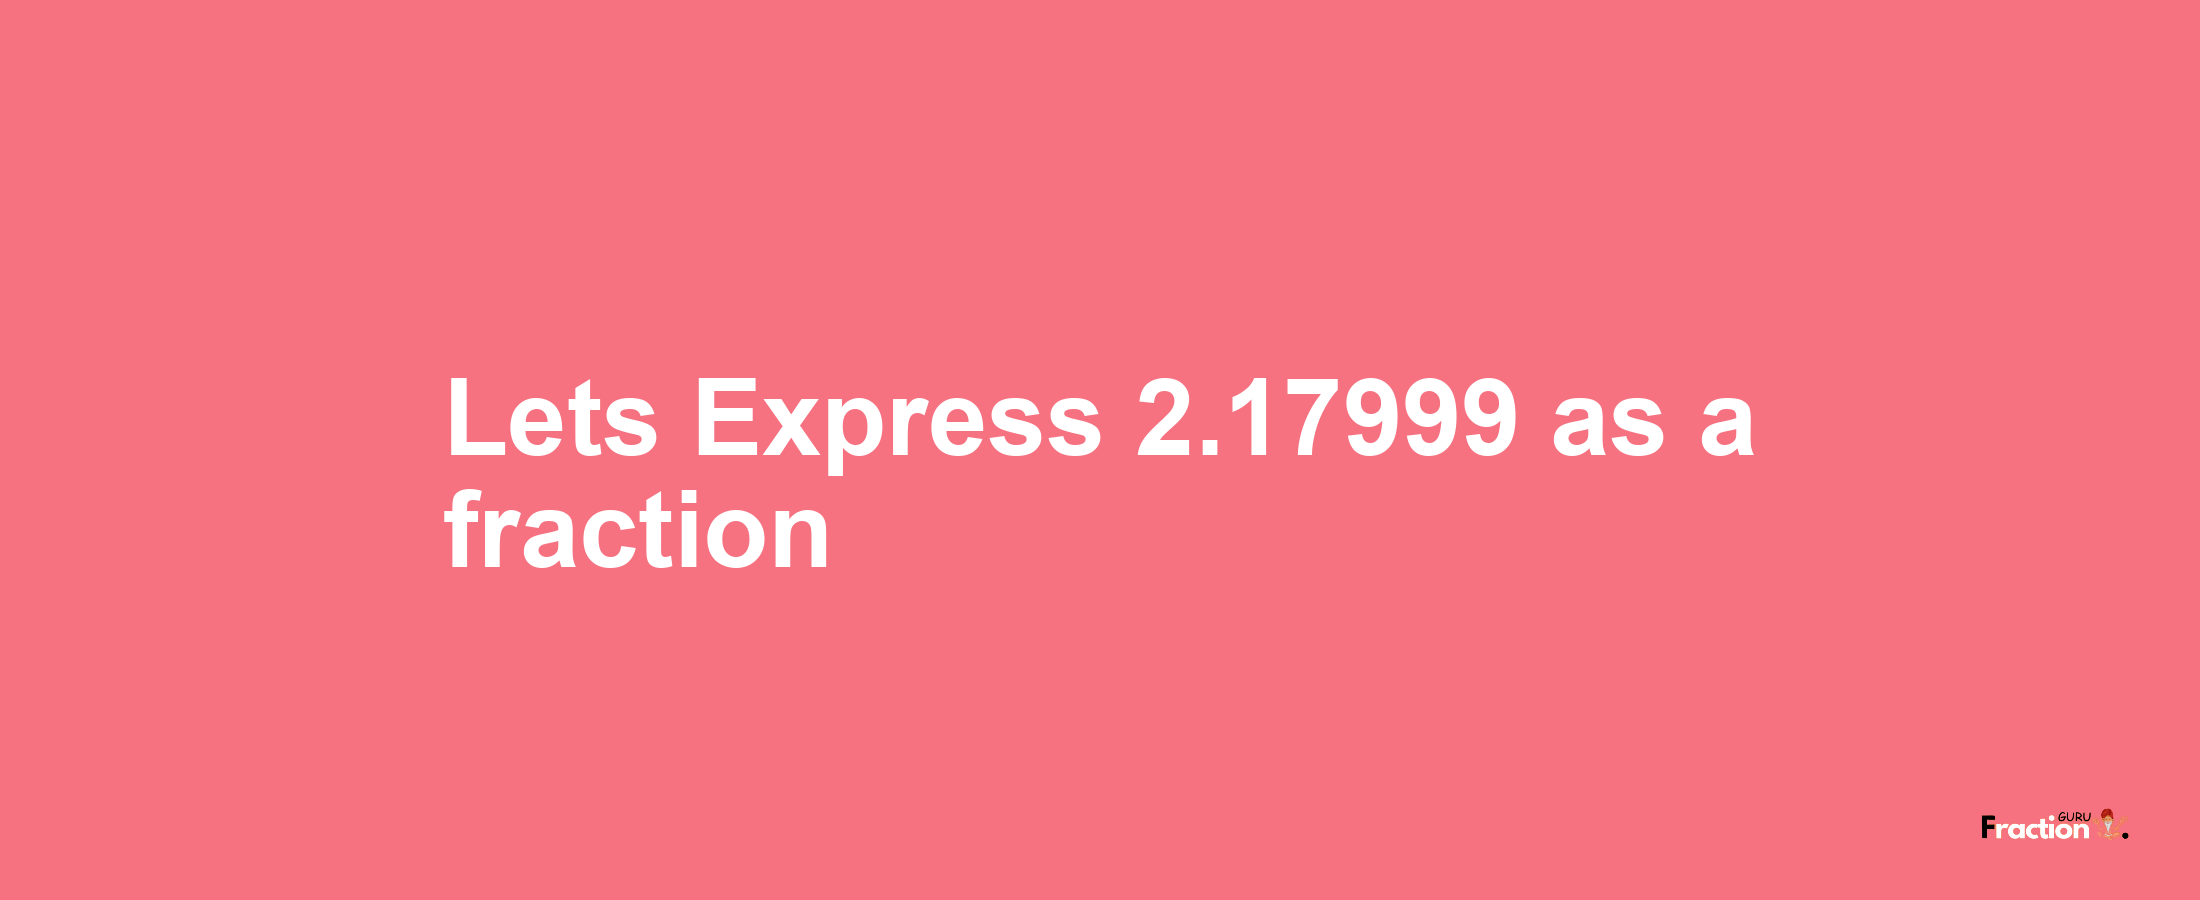 Lets Express 2.17999 as afraction